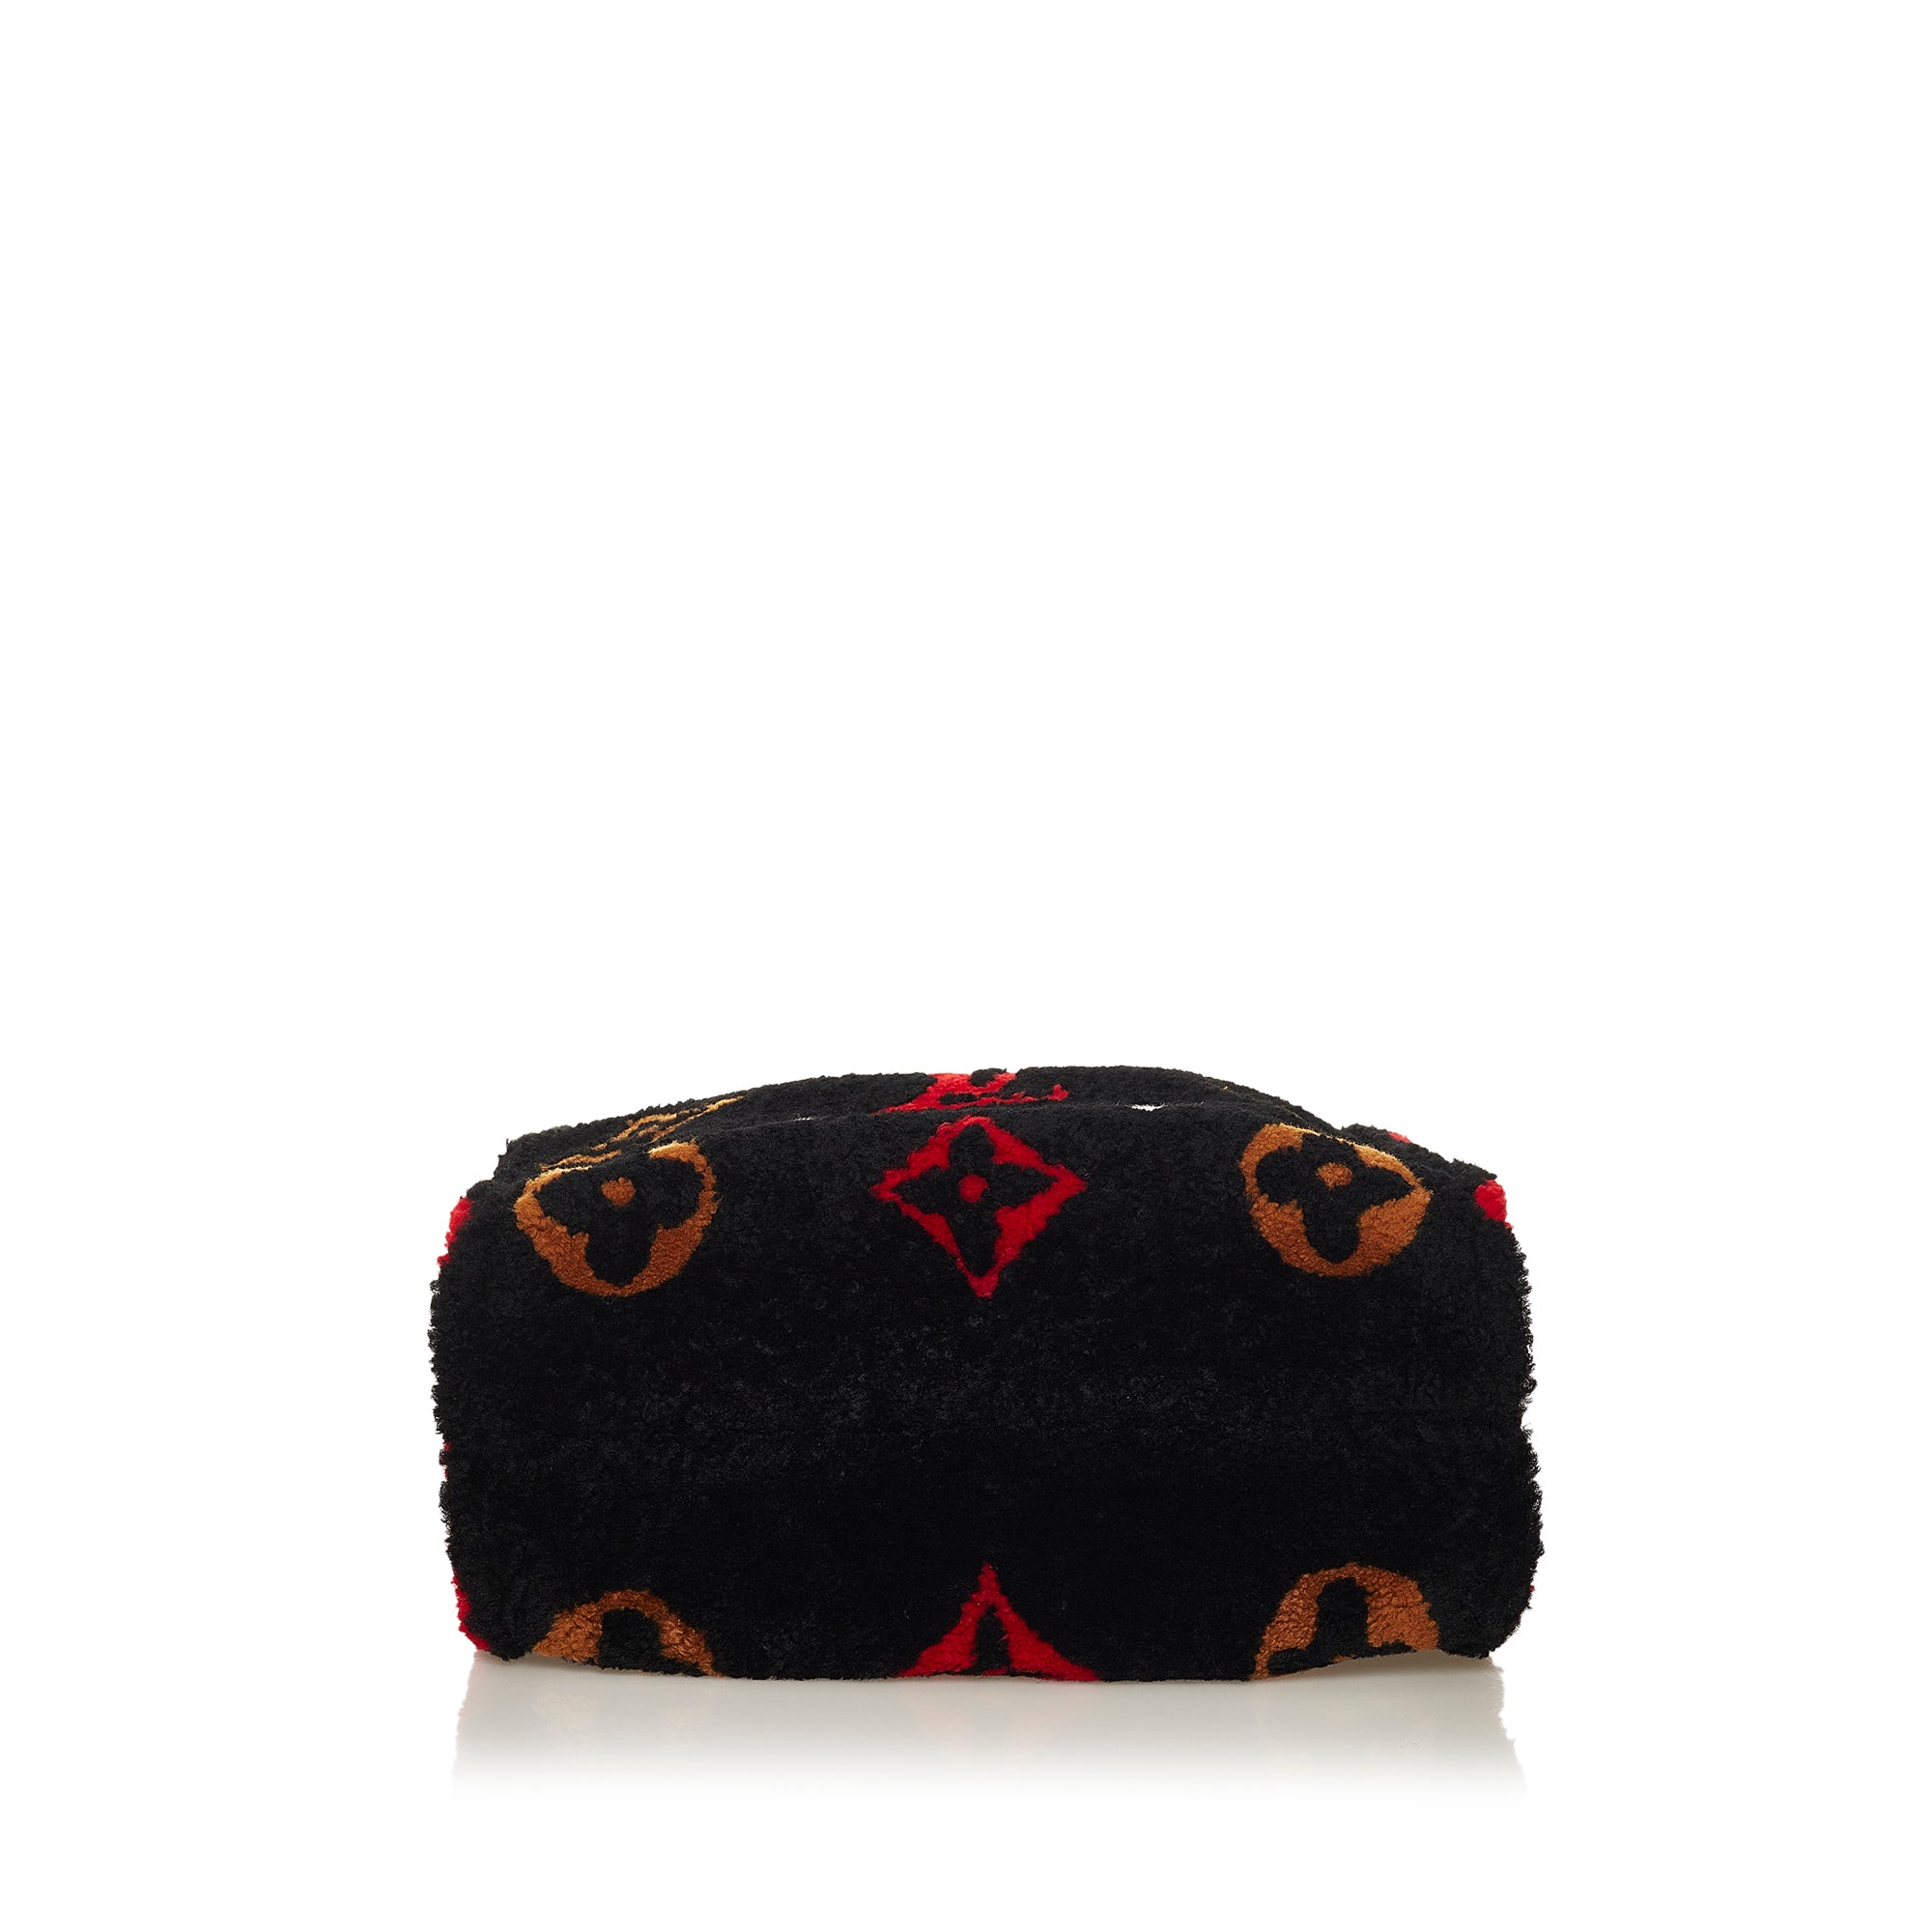 New Limited Edition Louis Vuitton OntheGo GM Teddy